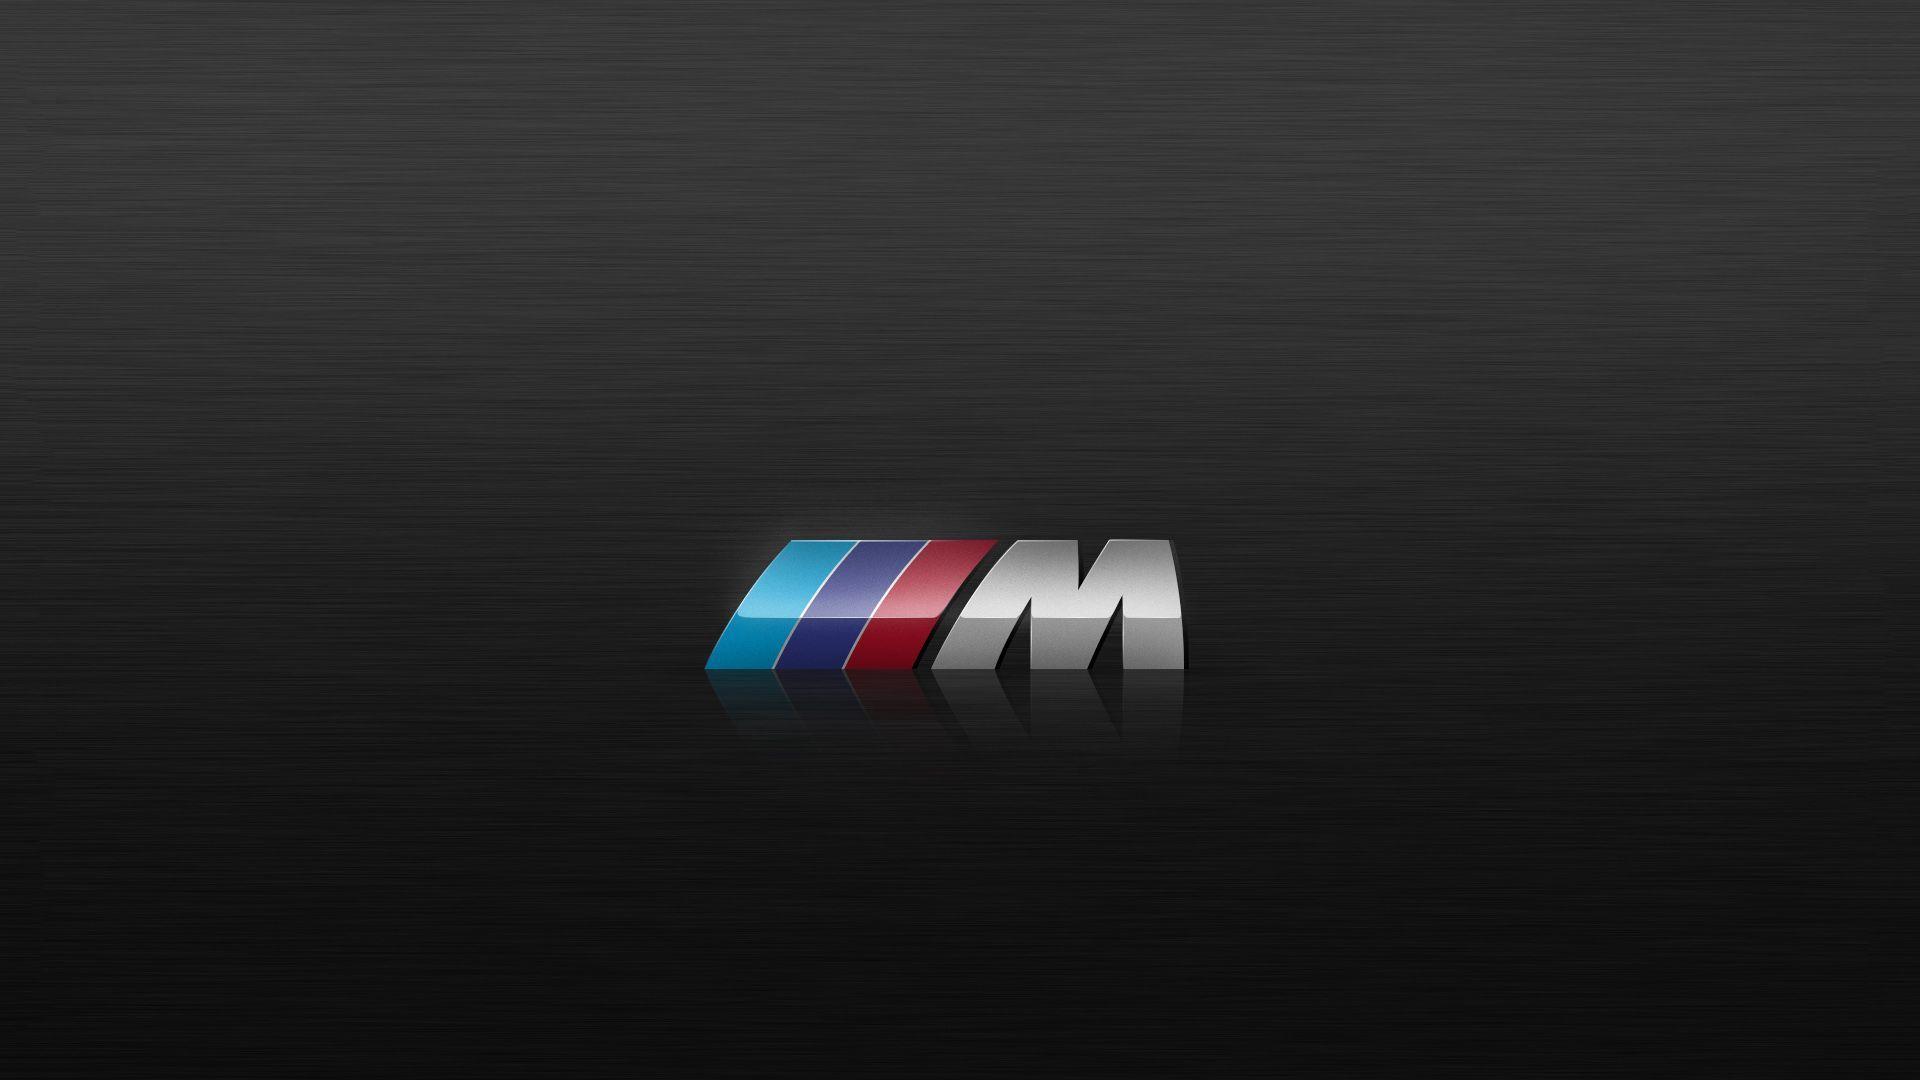 Bmw Logo Wallpapers For Mobile - Wallpaper Cave